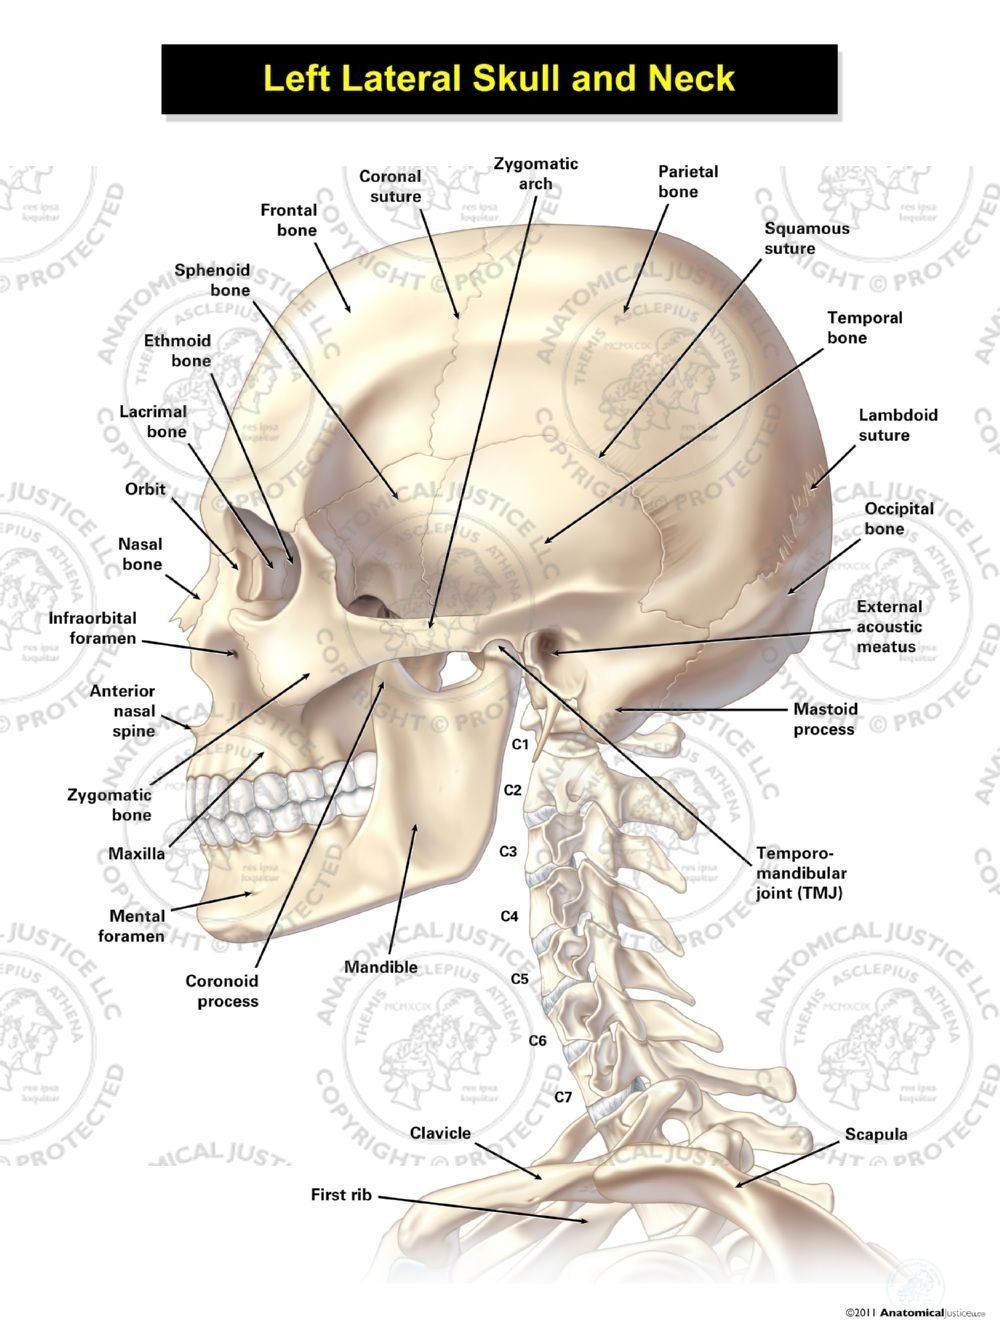 Left Lateral Skull and Neck